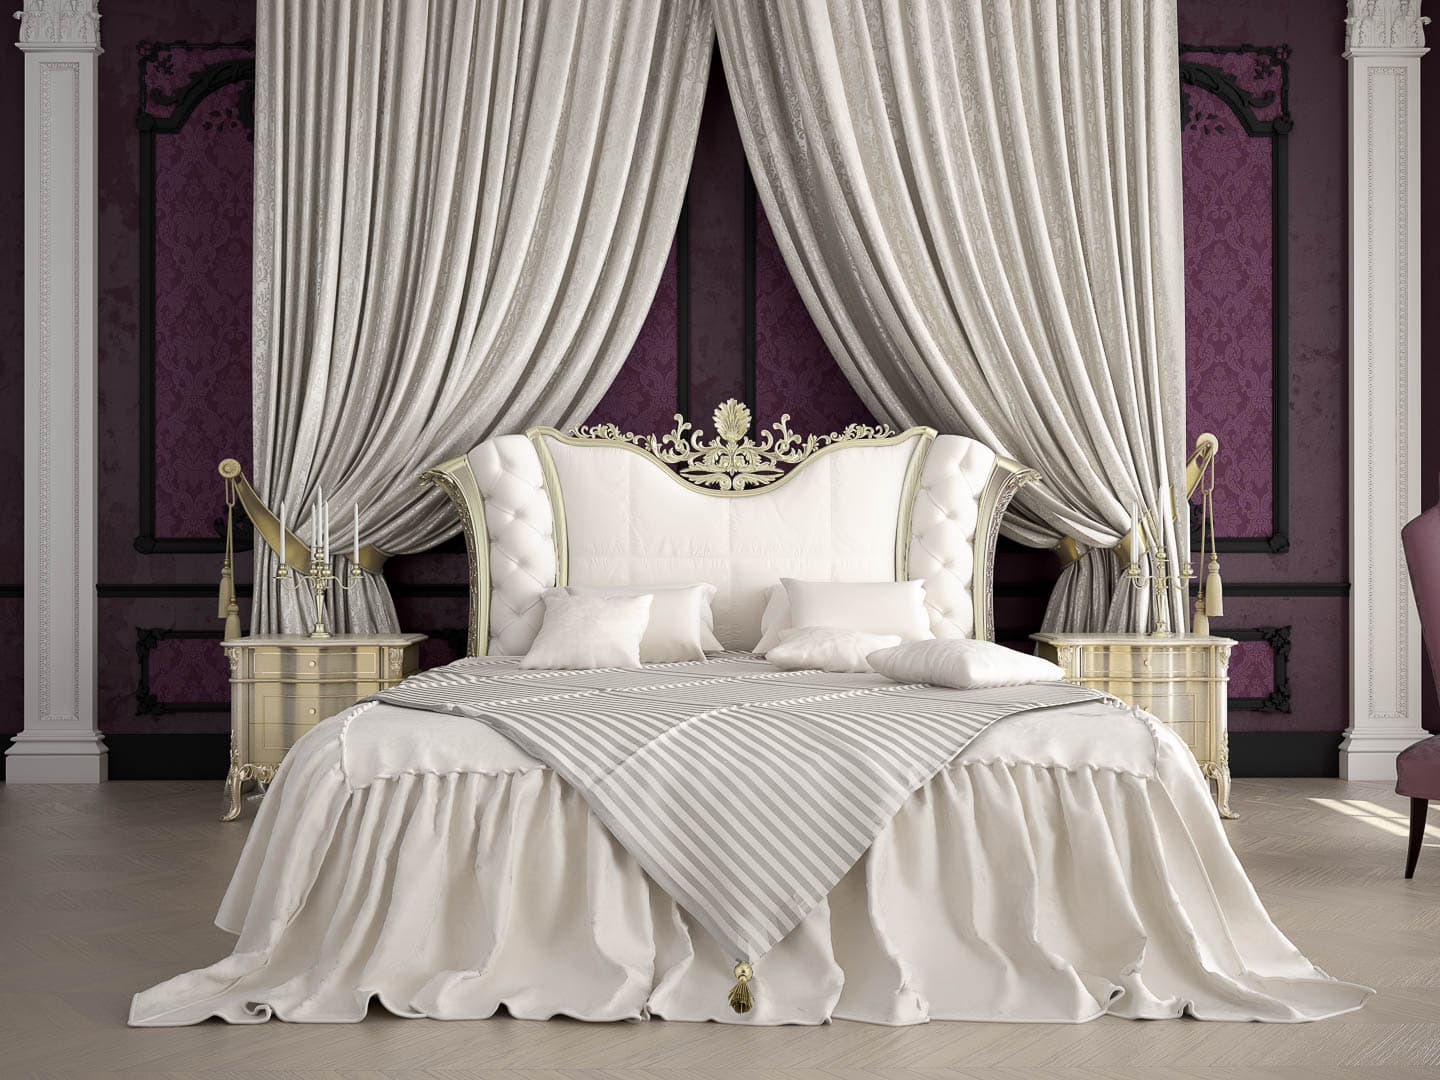 all white bed in surrounded by white curtains in front of a dark purple paneled wall